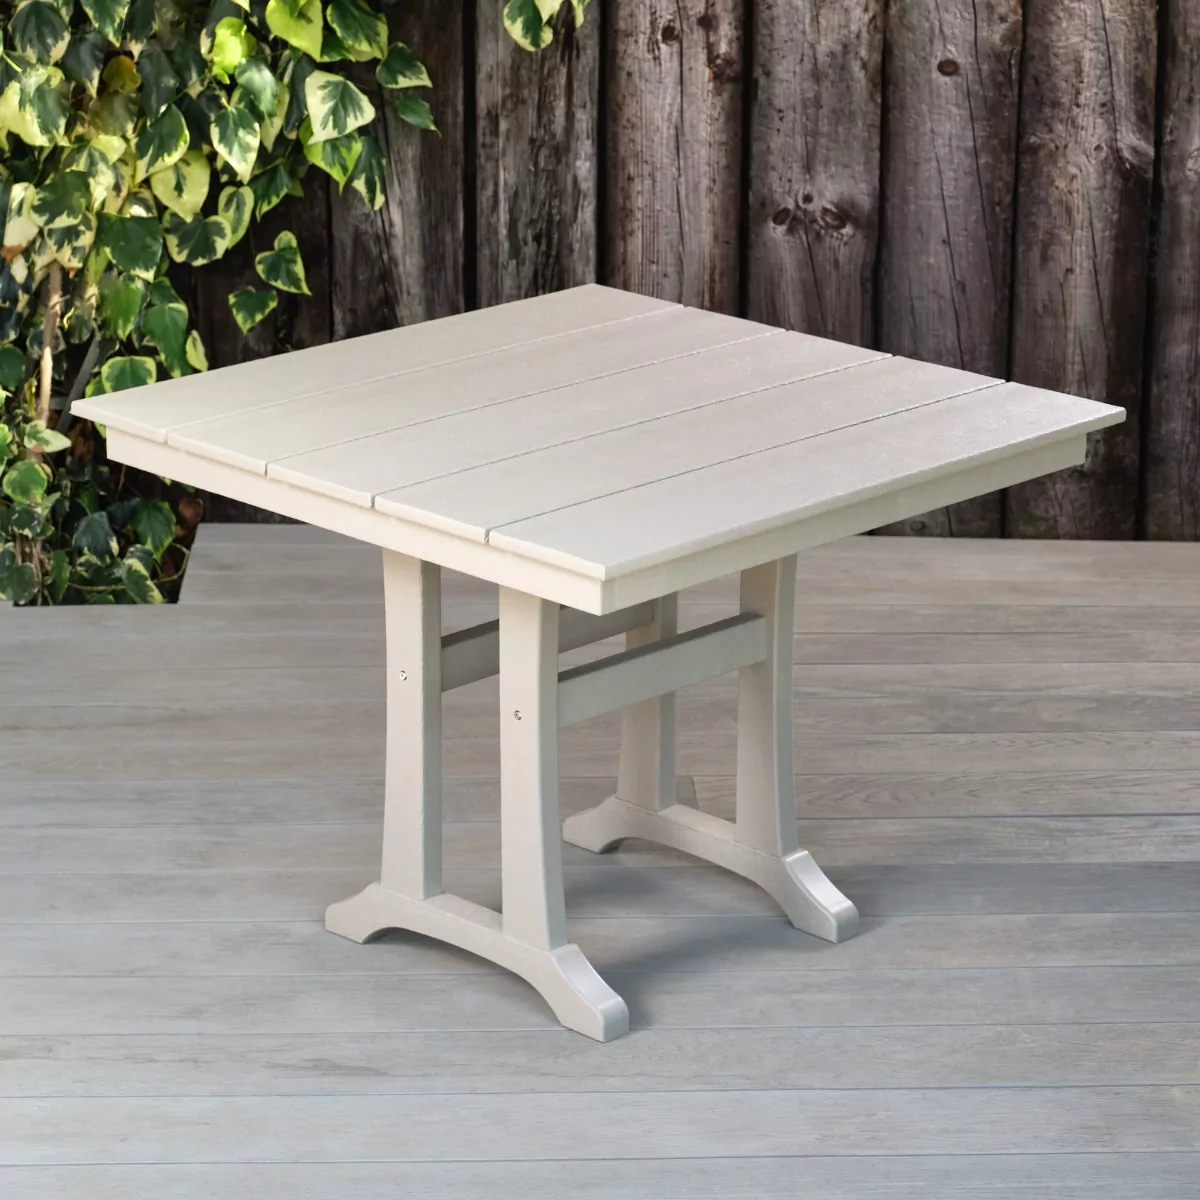 Recycled Plastic Square Outdoor Table - Cream